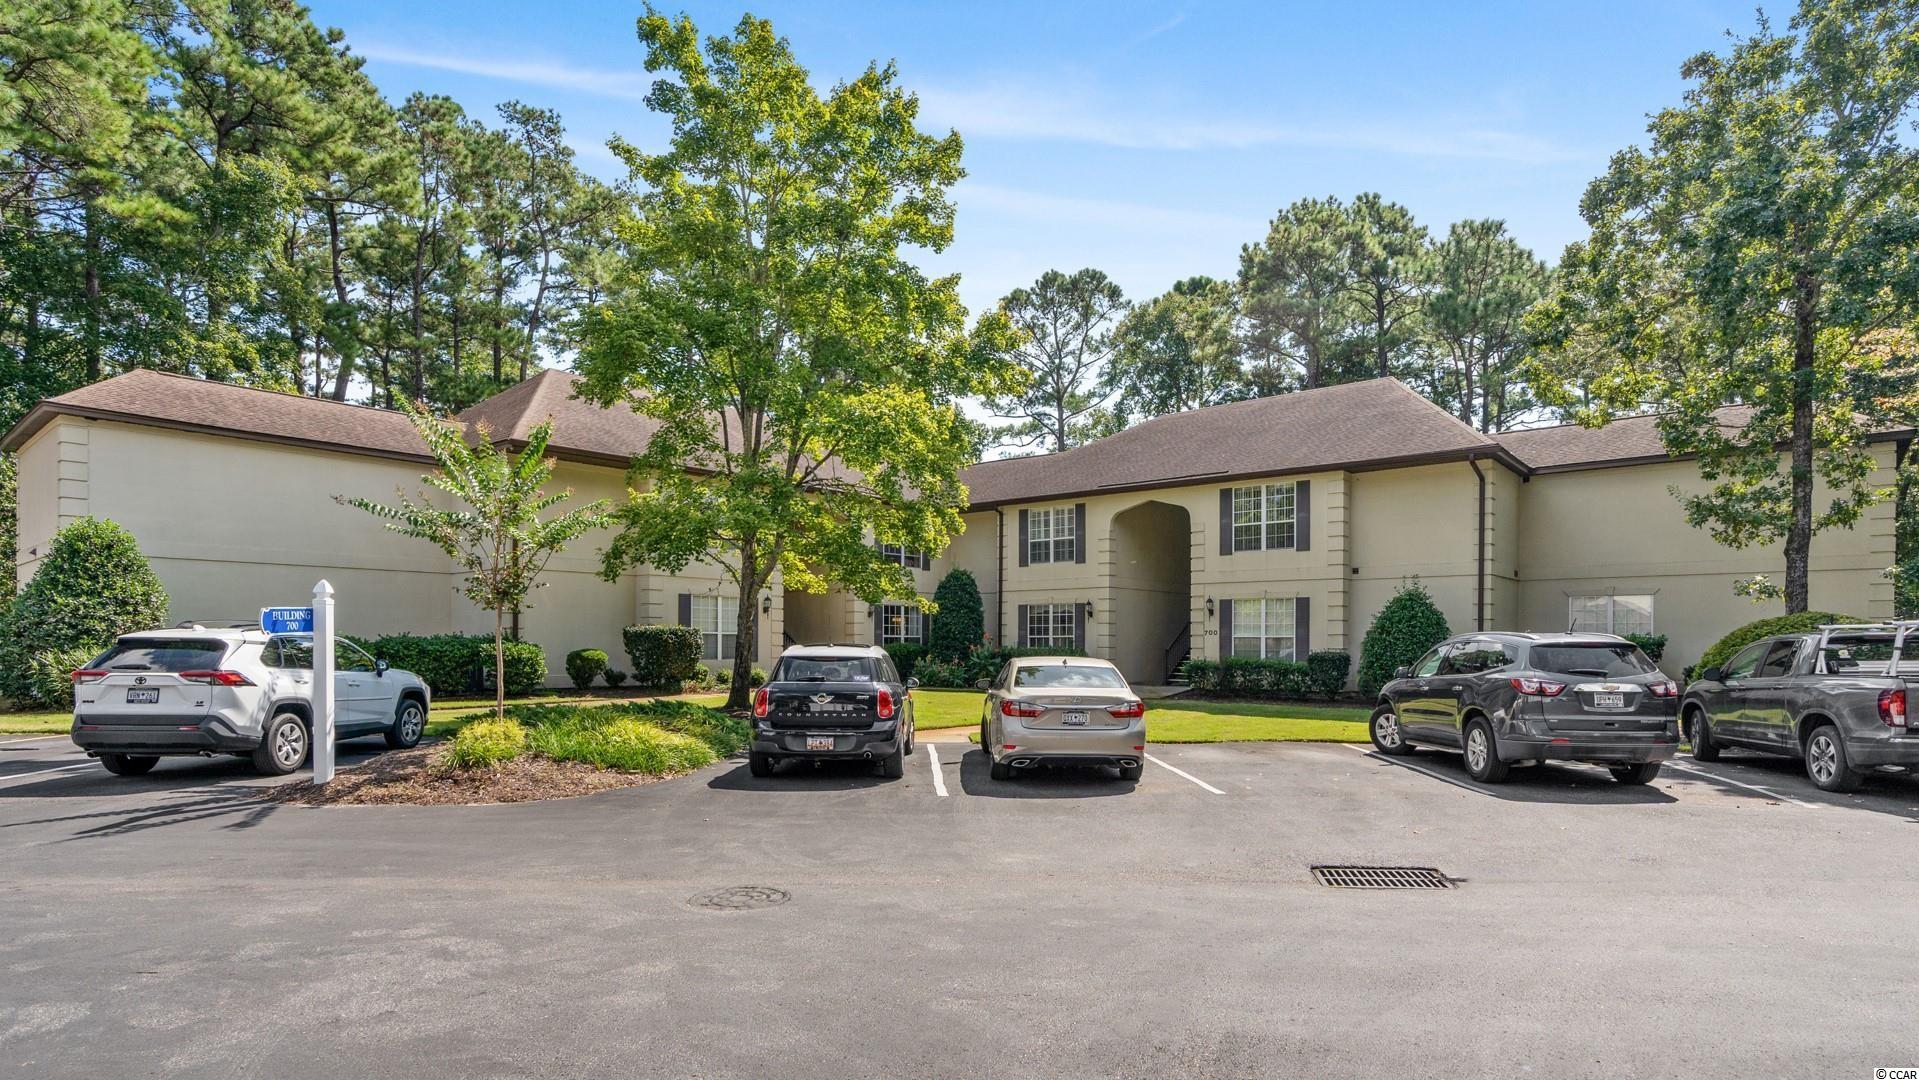 702 Pipers Ln. Myrtle Beach, SC 29577